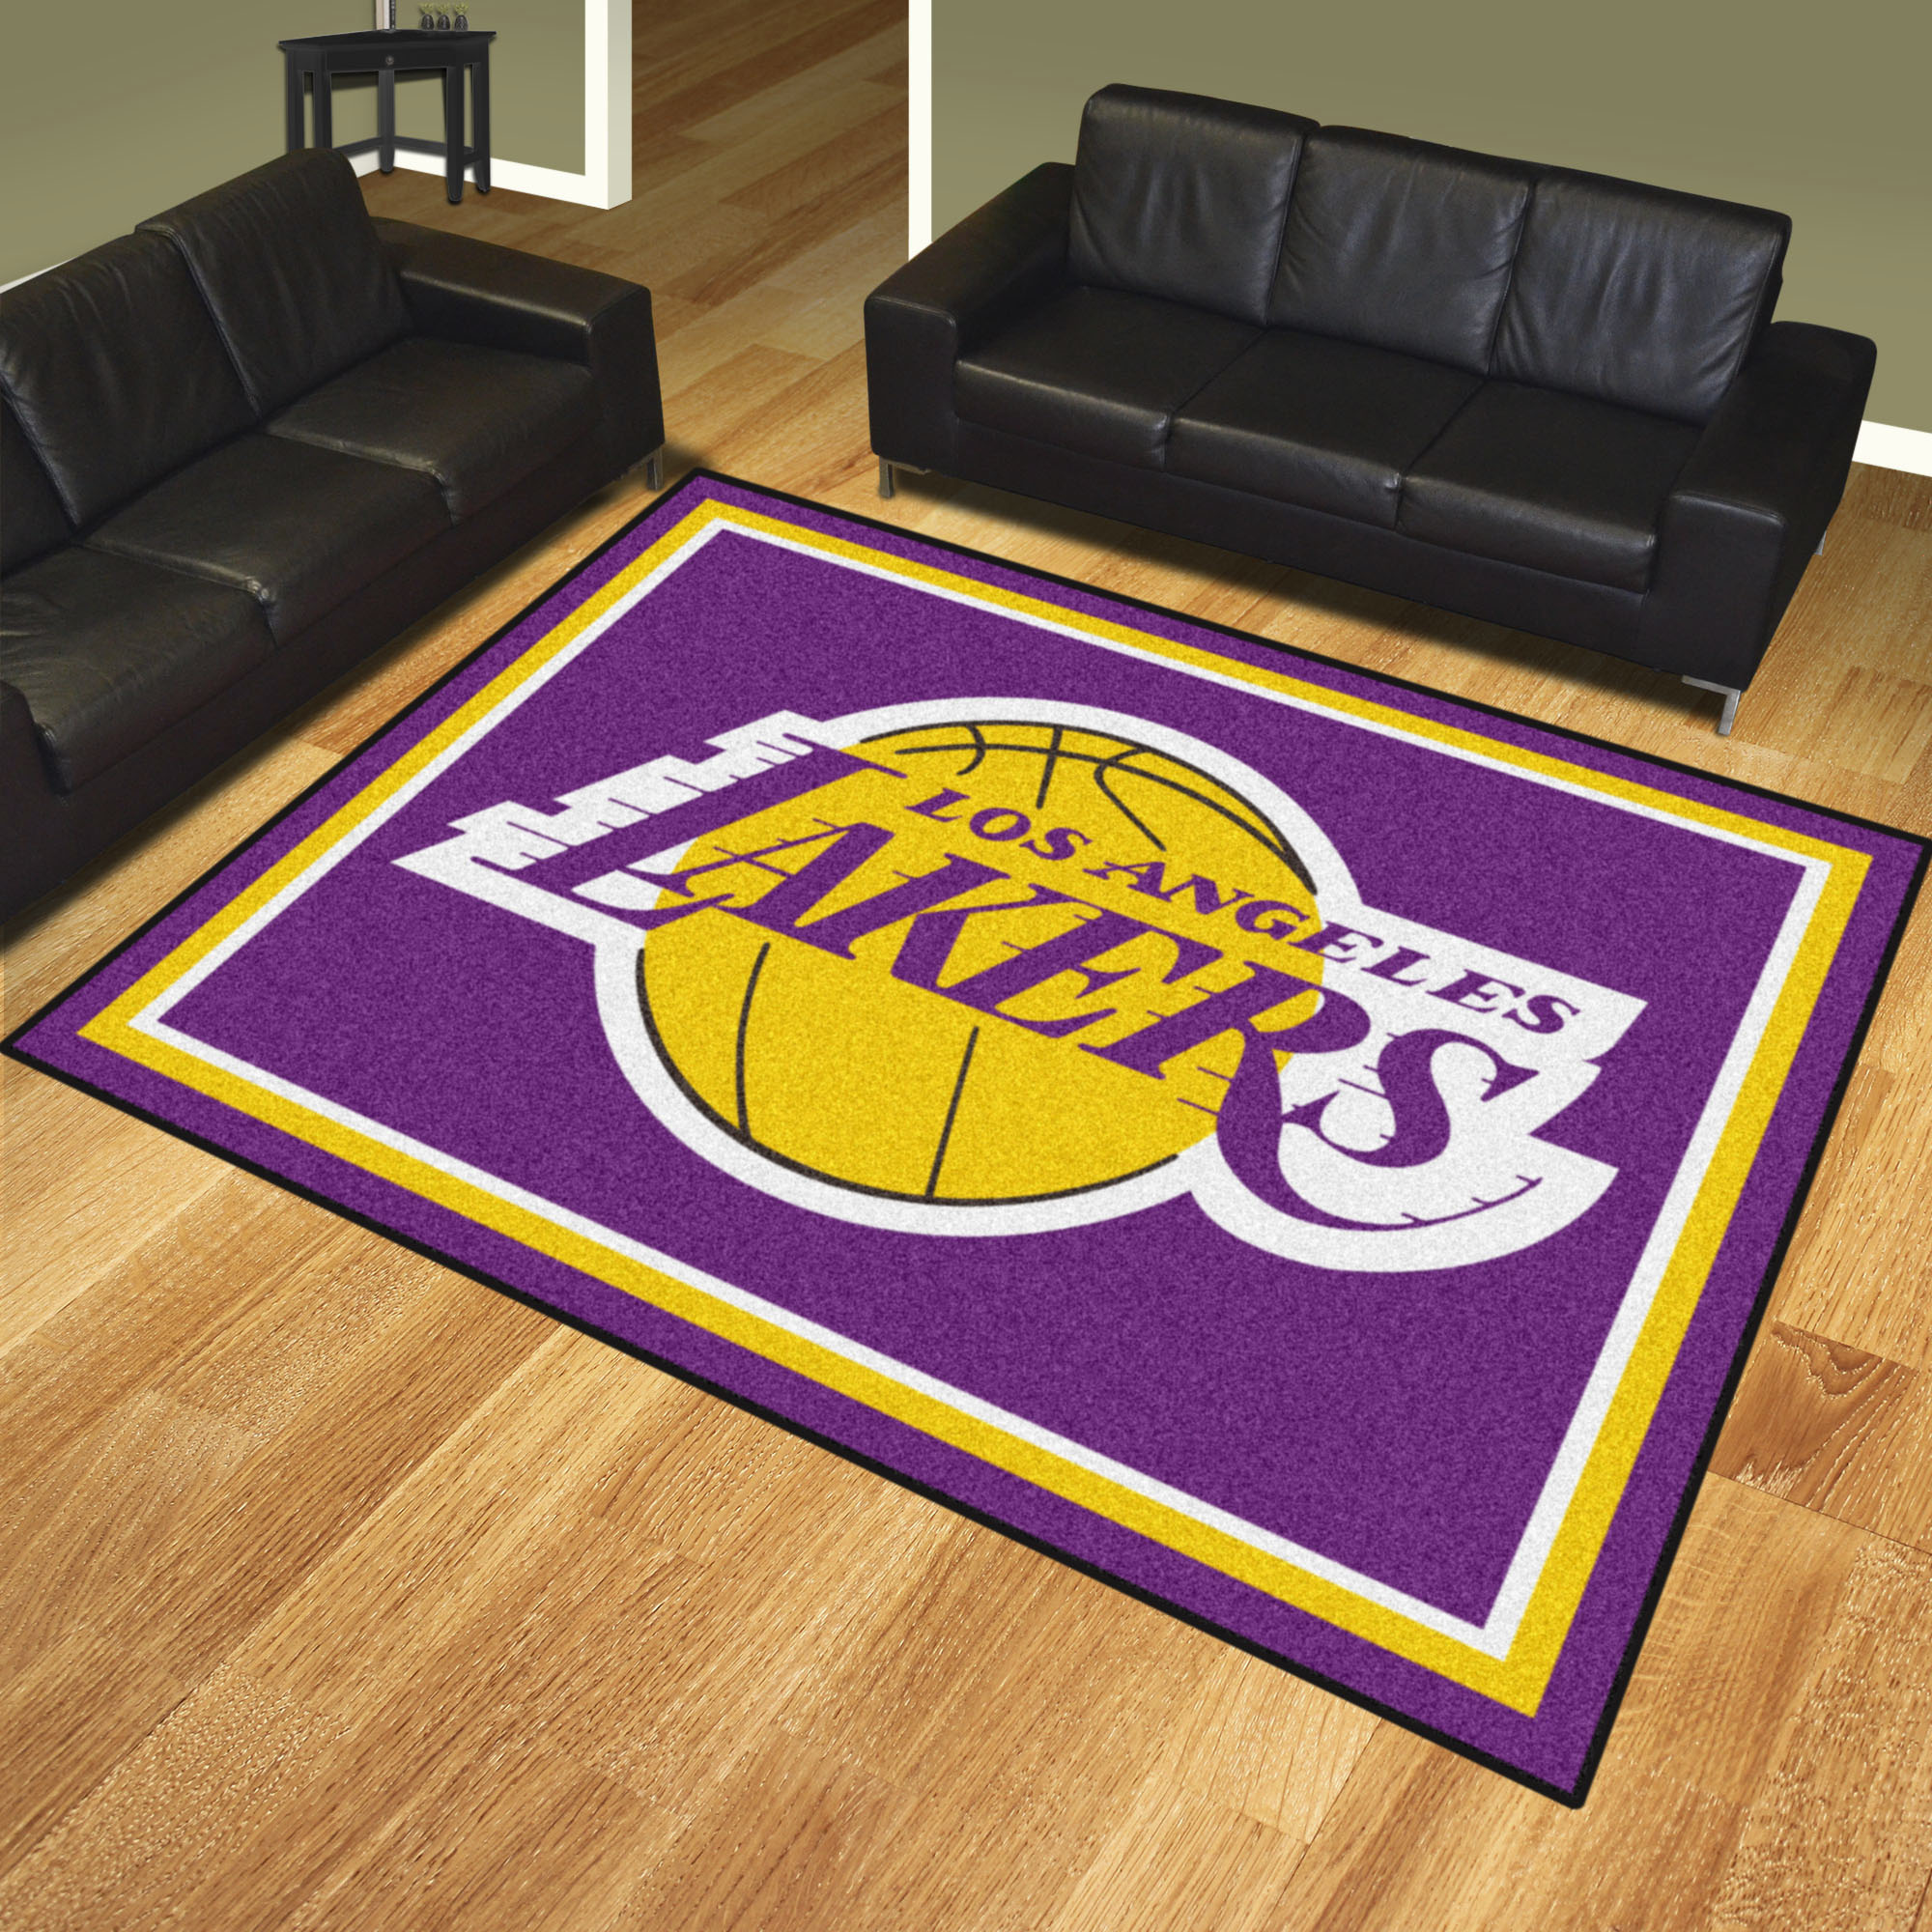 Los Angeles Lakers Ultra Plush 8x10 Area Rug